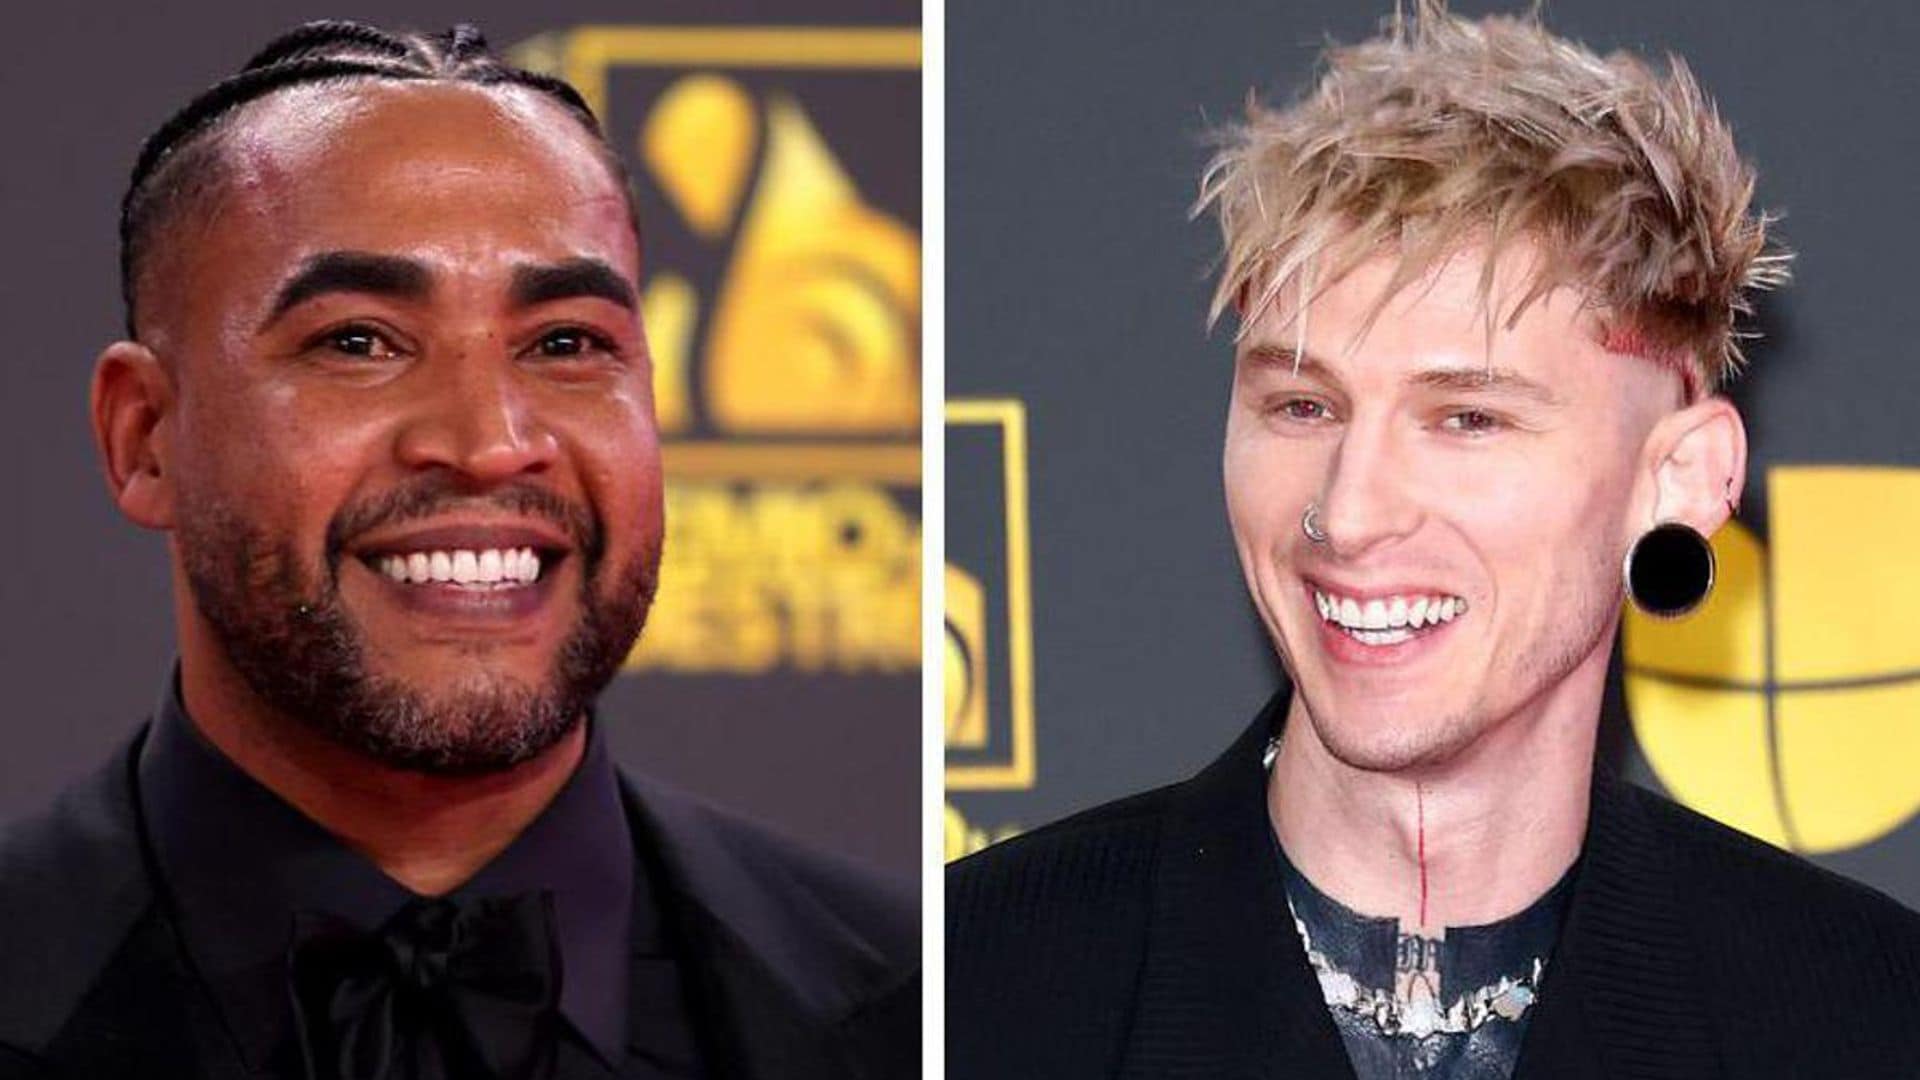 Premio Lo Nuestro’s unlikely duo Don Omar and Machine Gun Kelly hit the stage